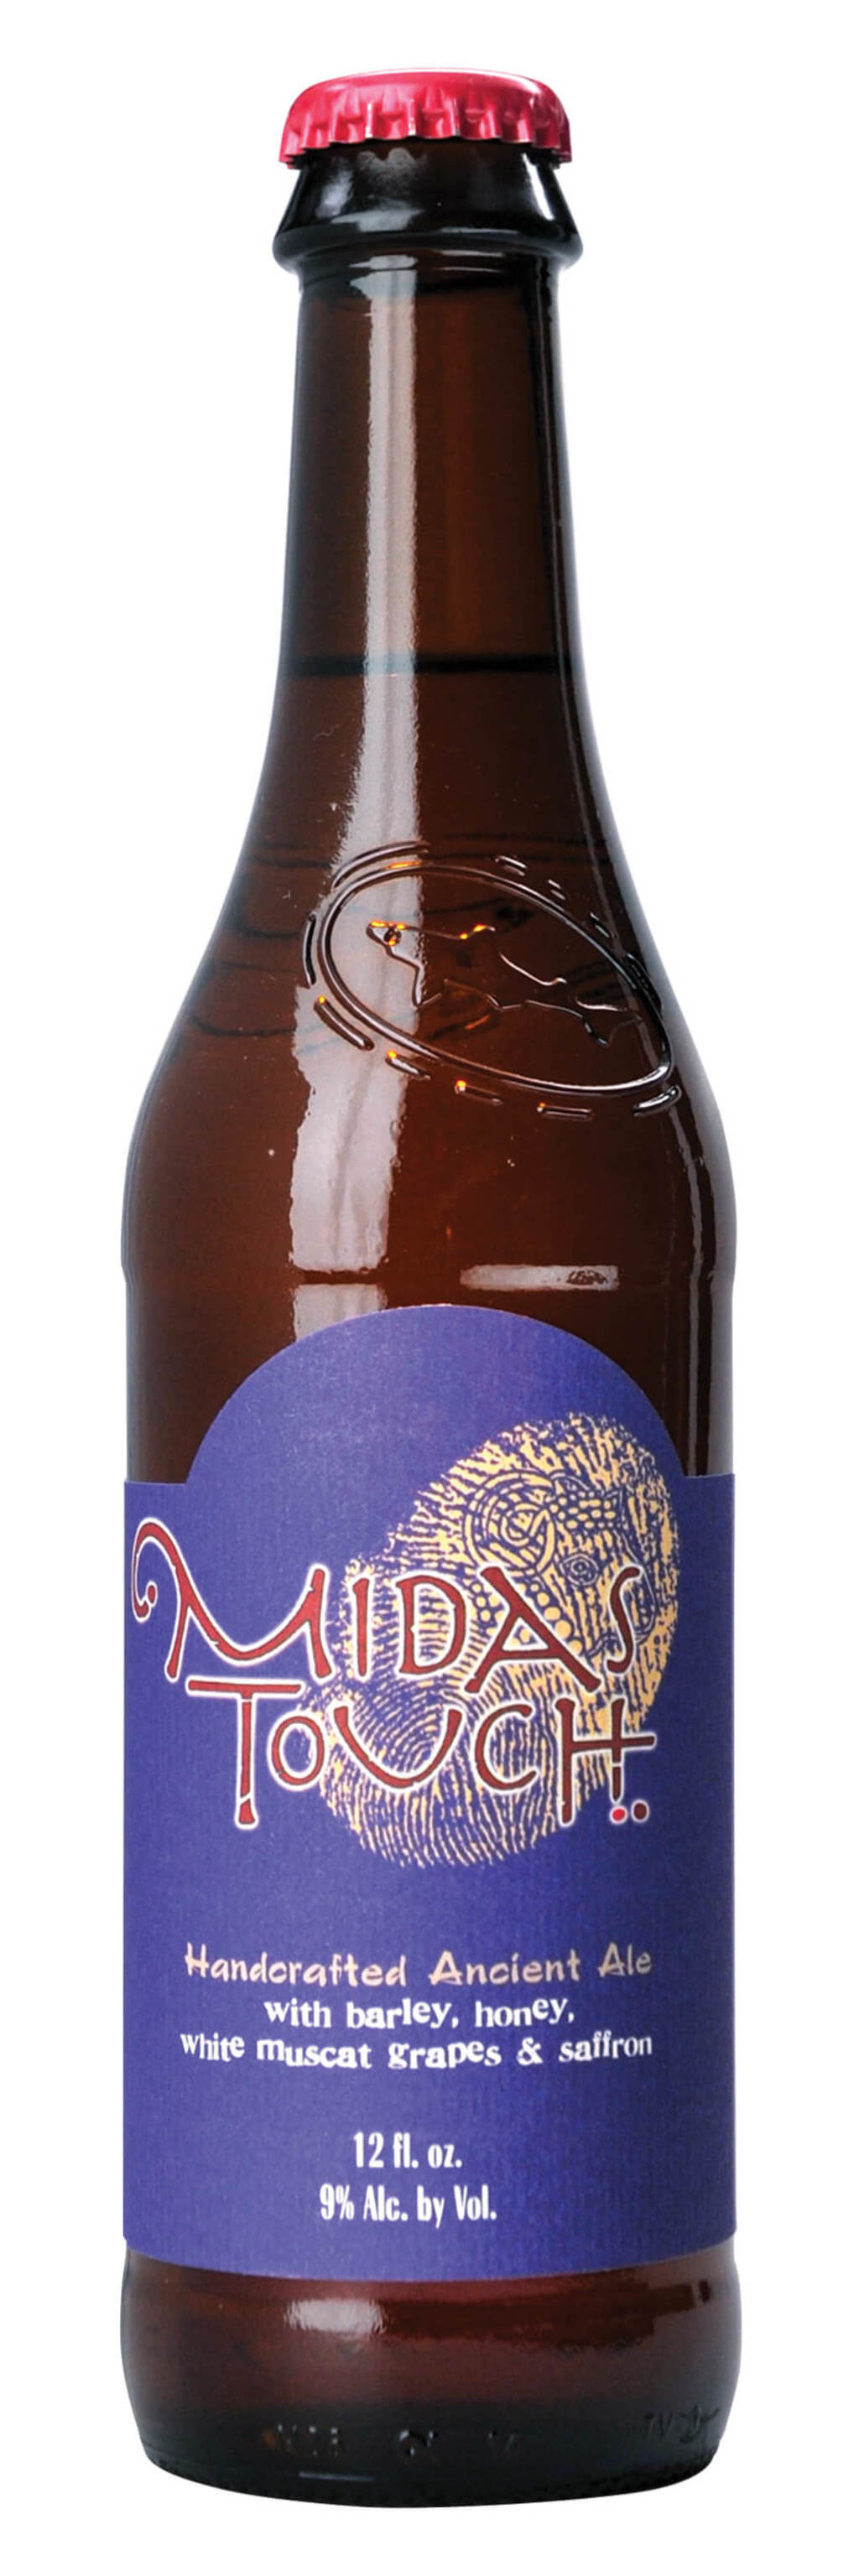 Dogfish Head's Midas Touch. Photo courtesy of Dogfish Head Craft Brewery.